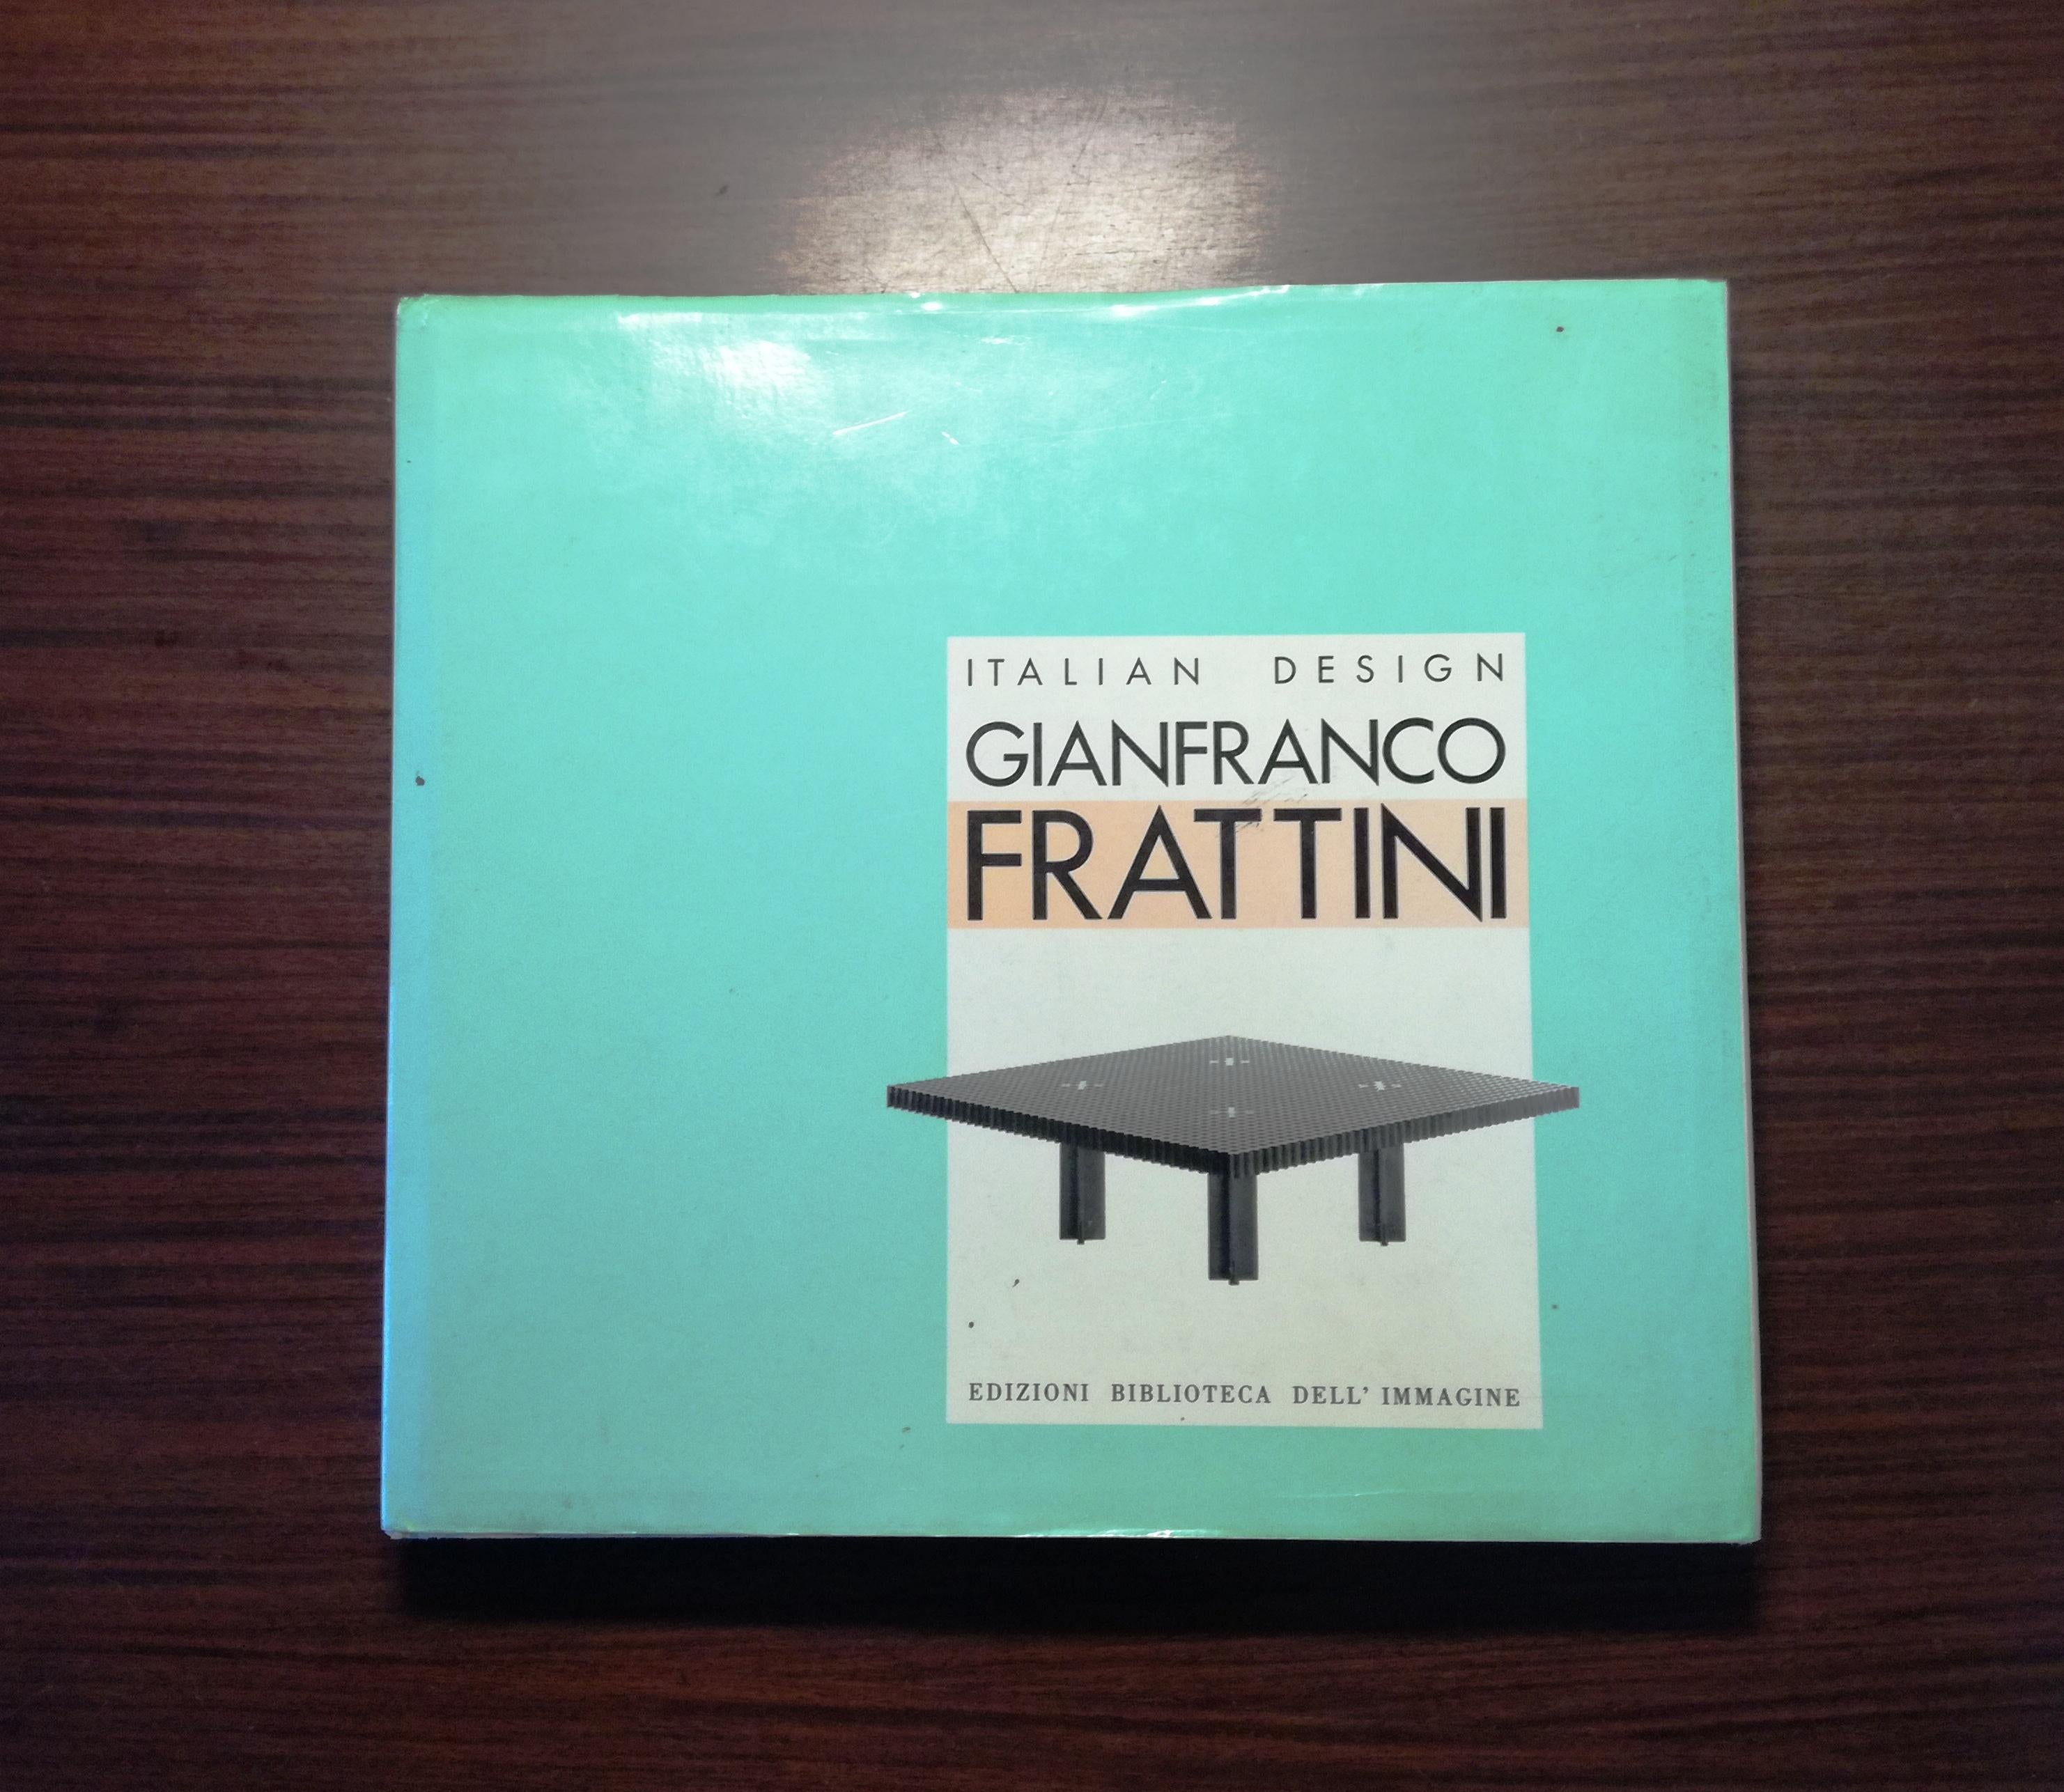 Gianfranco Frattini, Italian Design. book. edizioni Biblioteca dell'immagine 1988. edited by Pier Carlo Santini-reserved edition for Acerbis International ( 160 copies) , with accompanying letter . pages 188, measures 25 x23 cm. hardcover with dust